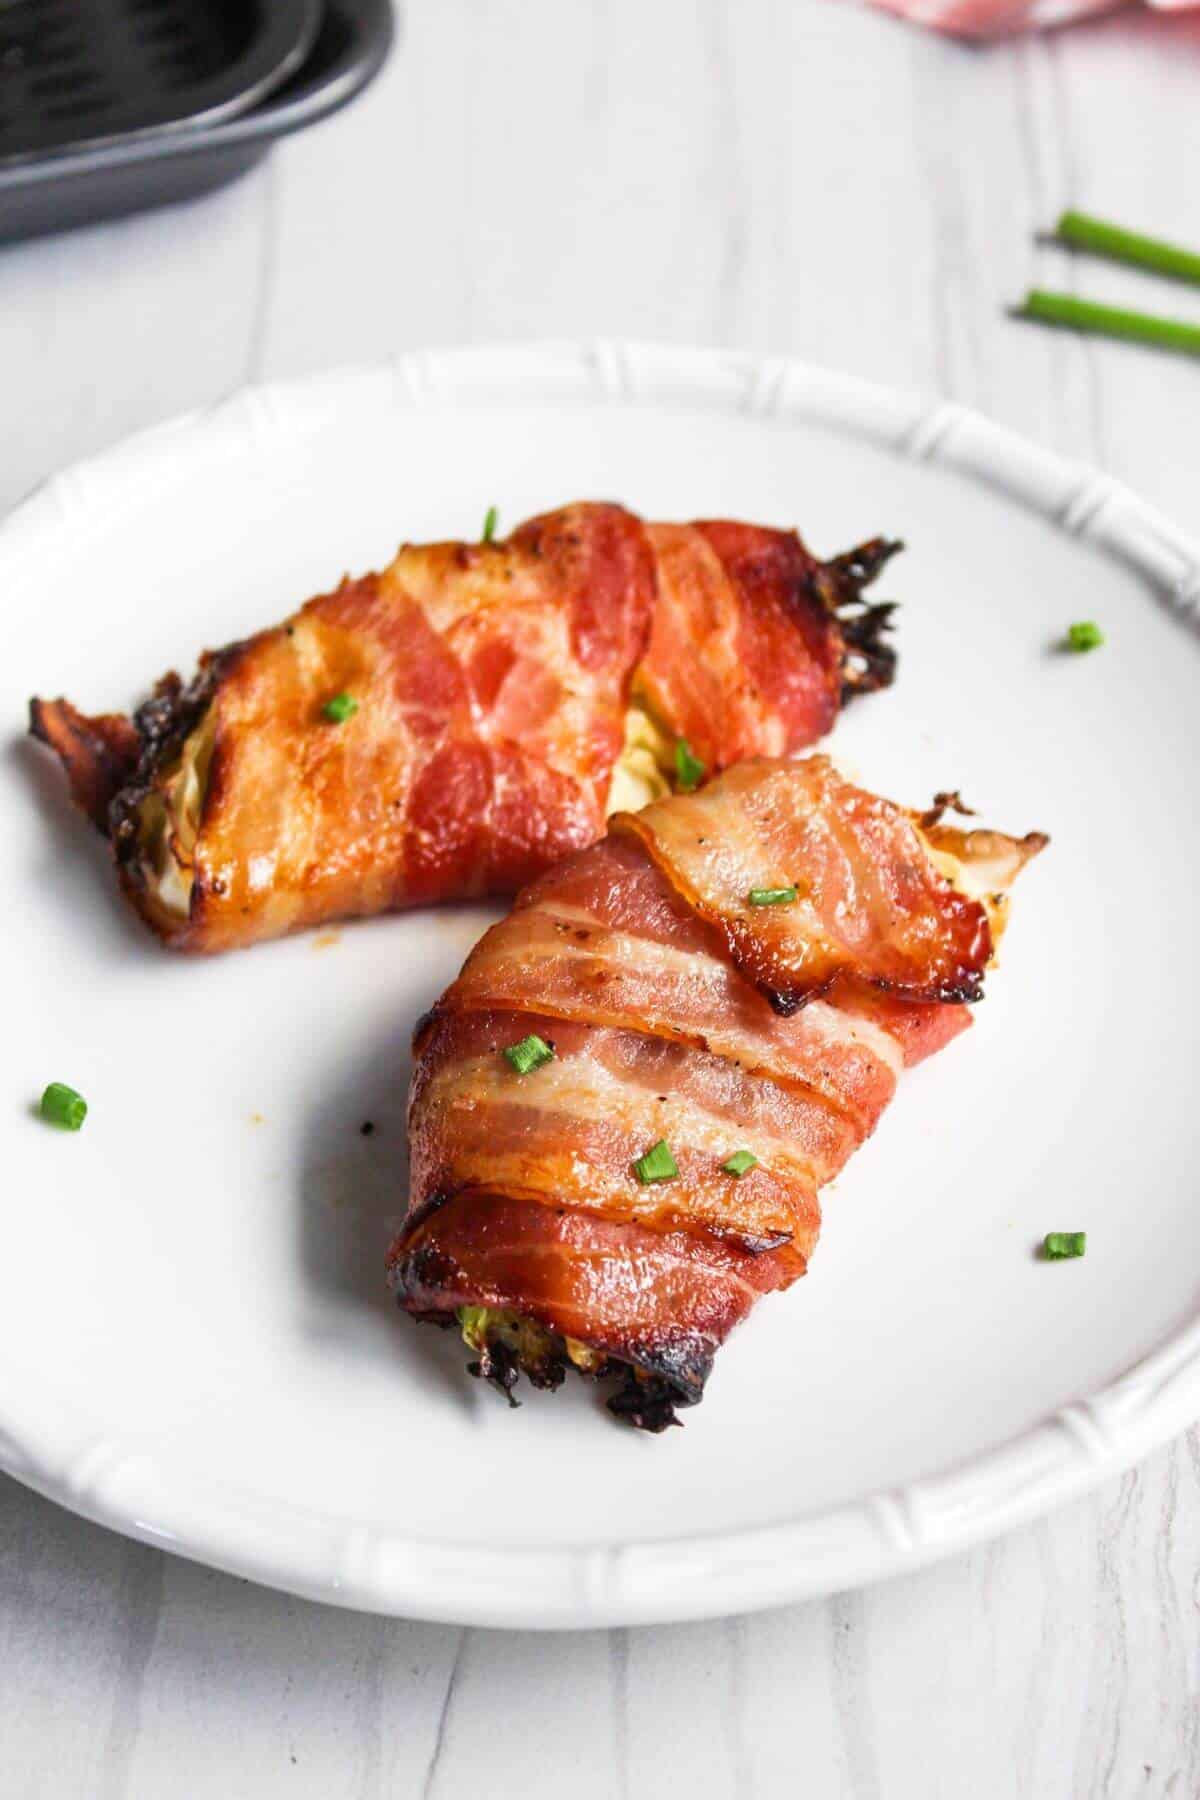 Bacon wrapped air fryer cabbage wedges on plate.